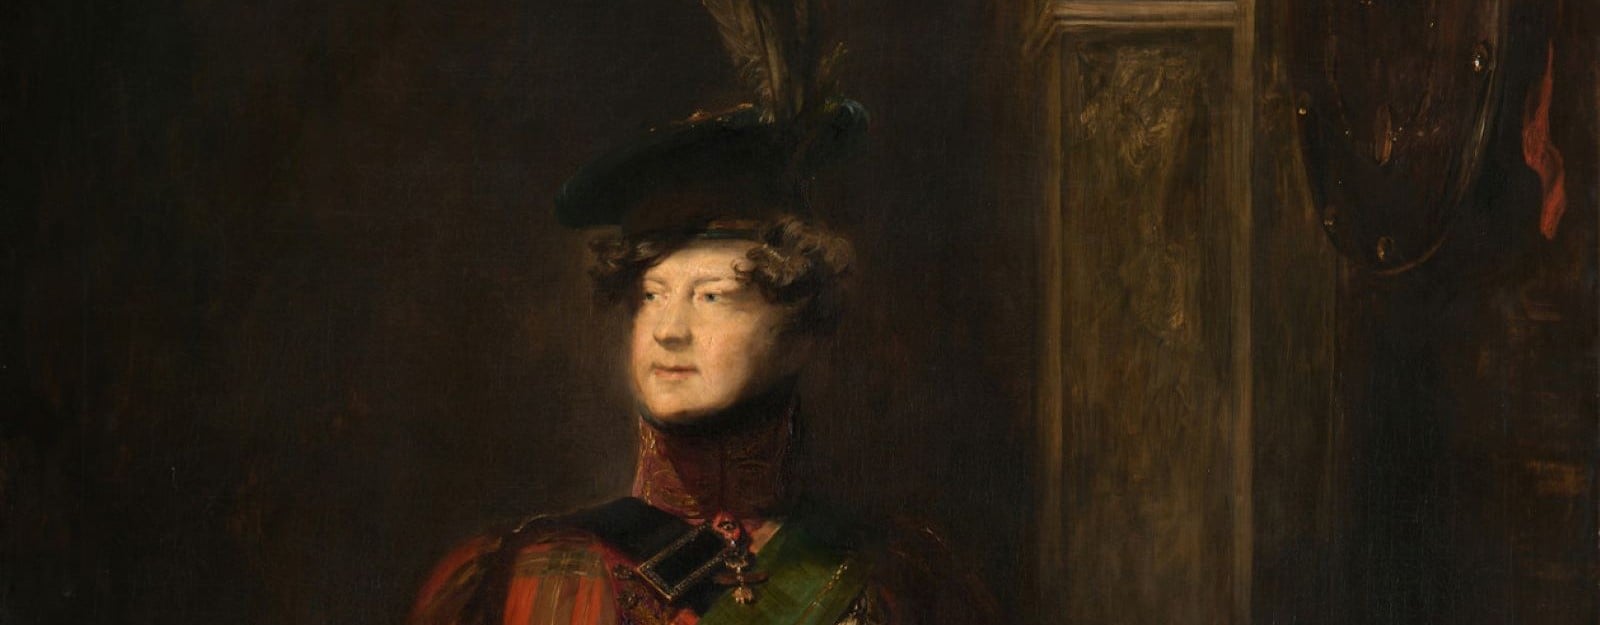 Head and shoulders from a portrait of George IV wearing Highland dress